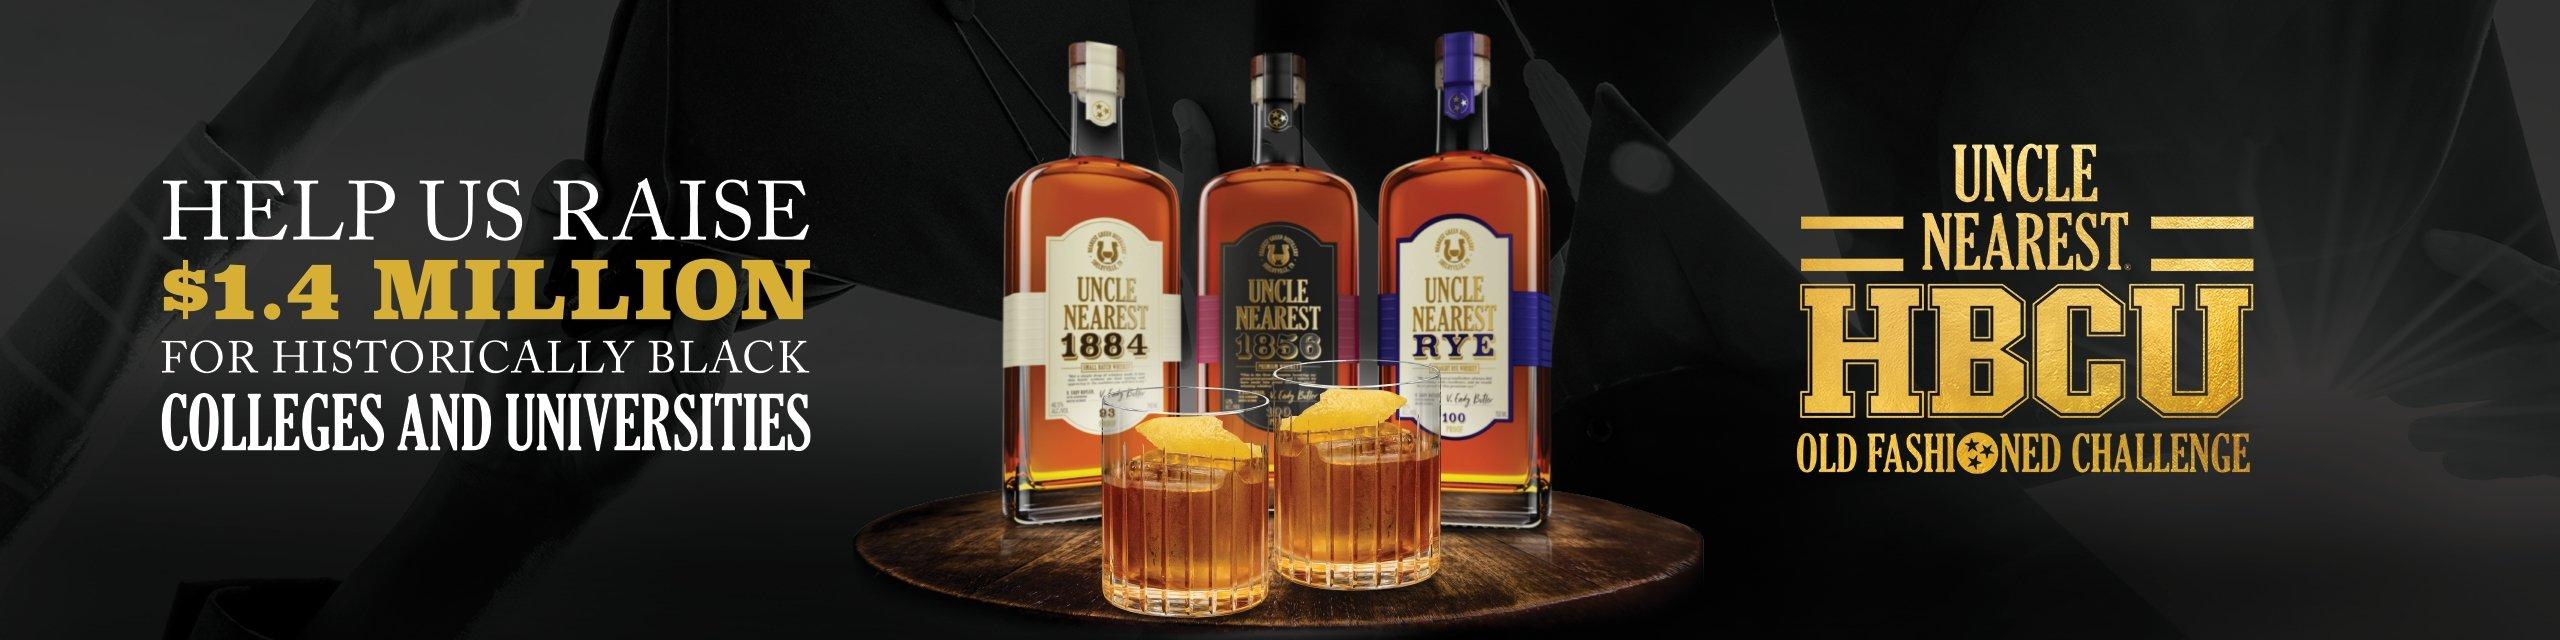 Uncle Nearest Premium Whiskey is the fastest growing "independent American whiskey brand in U.S. history. In 2019, Uncle Nearest 1884 joined the award-winning Uncle Nearest Premium Whiskey line-up including Uncle Nearest 1820 and Uncle Nearest 1856. Together, these three ultra-premium whiskies have garnered more than 85 awards since launching in July 2017, including two “World’s Best” by World Whiskies Awards, “Top 5 Whiskies in the World,” by Cigar & Spirits Magazine, “Chairman’s Trophy, Platinum and Double Gold” by SIP Awards and “Best American Whiskey.”